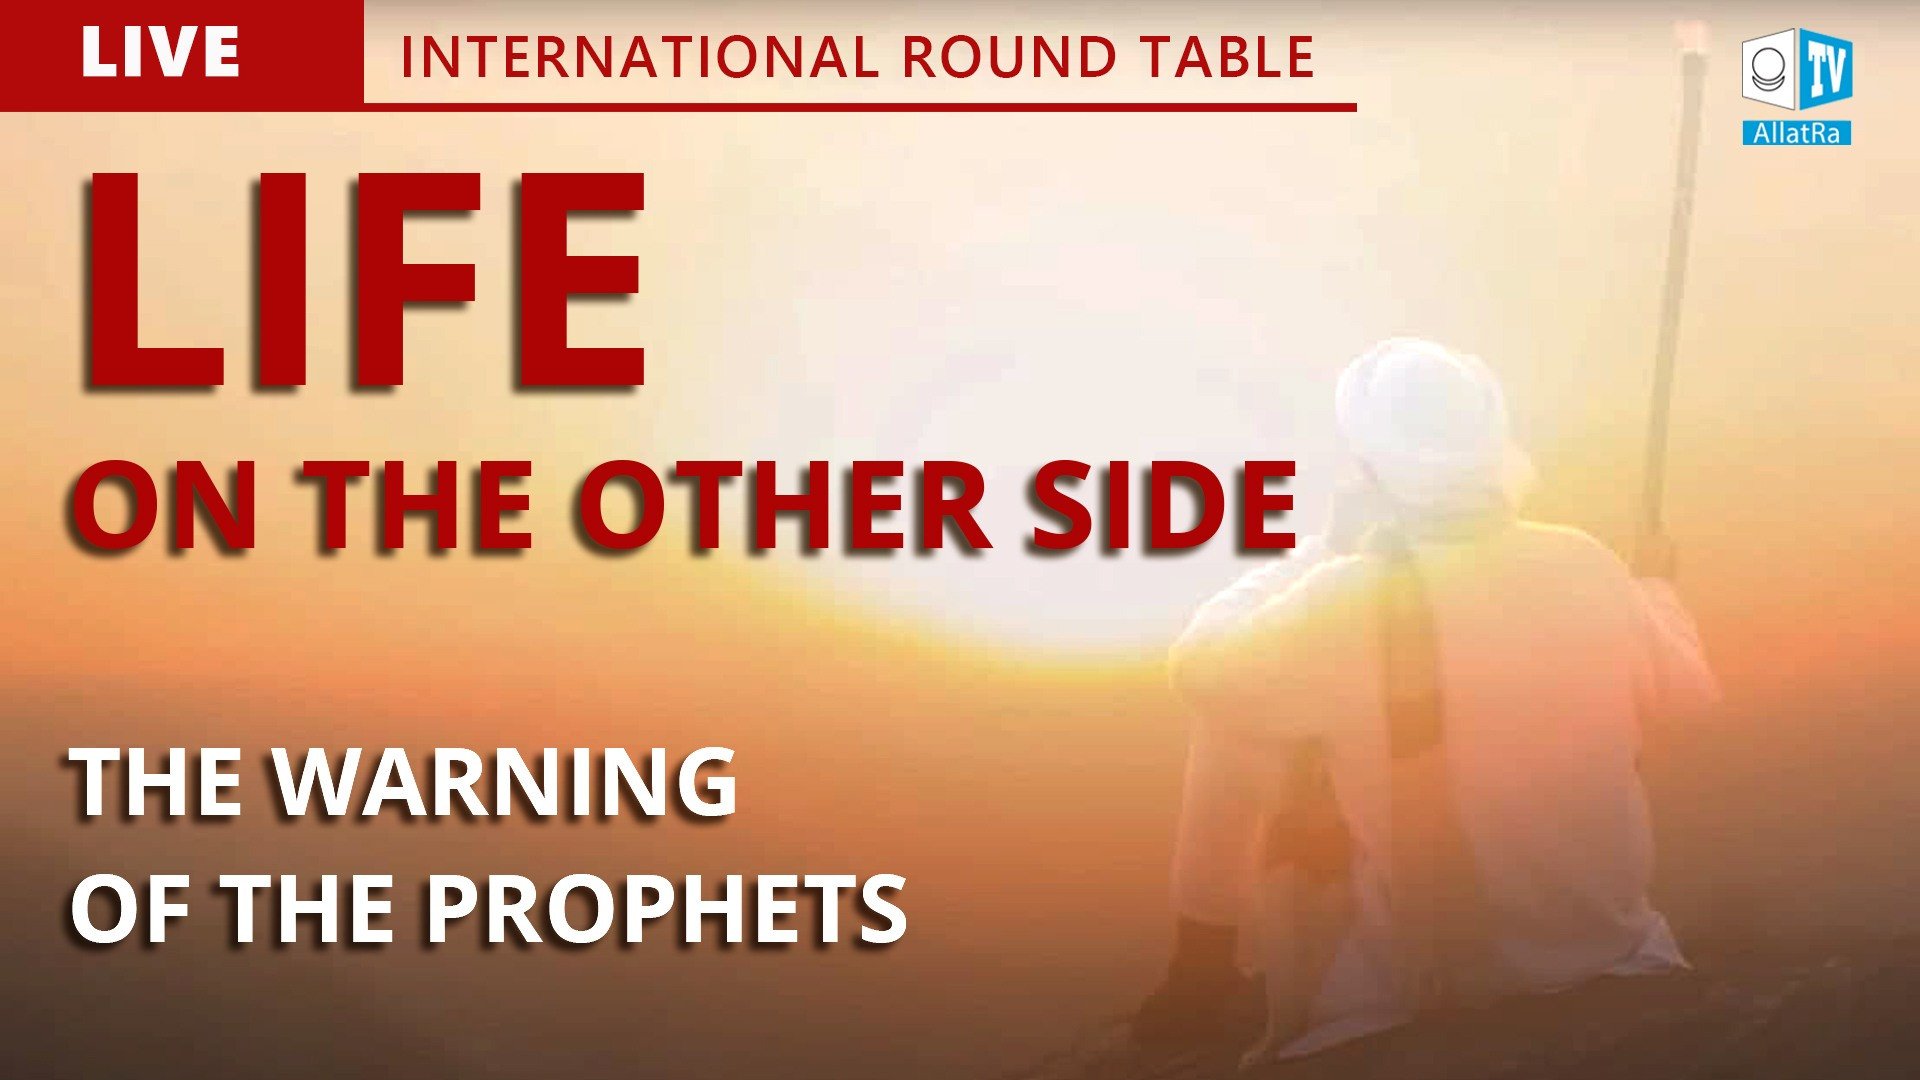 What did the Prophets say about the after-death fate of a human? | International Round Table